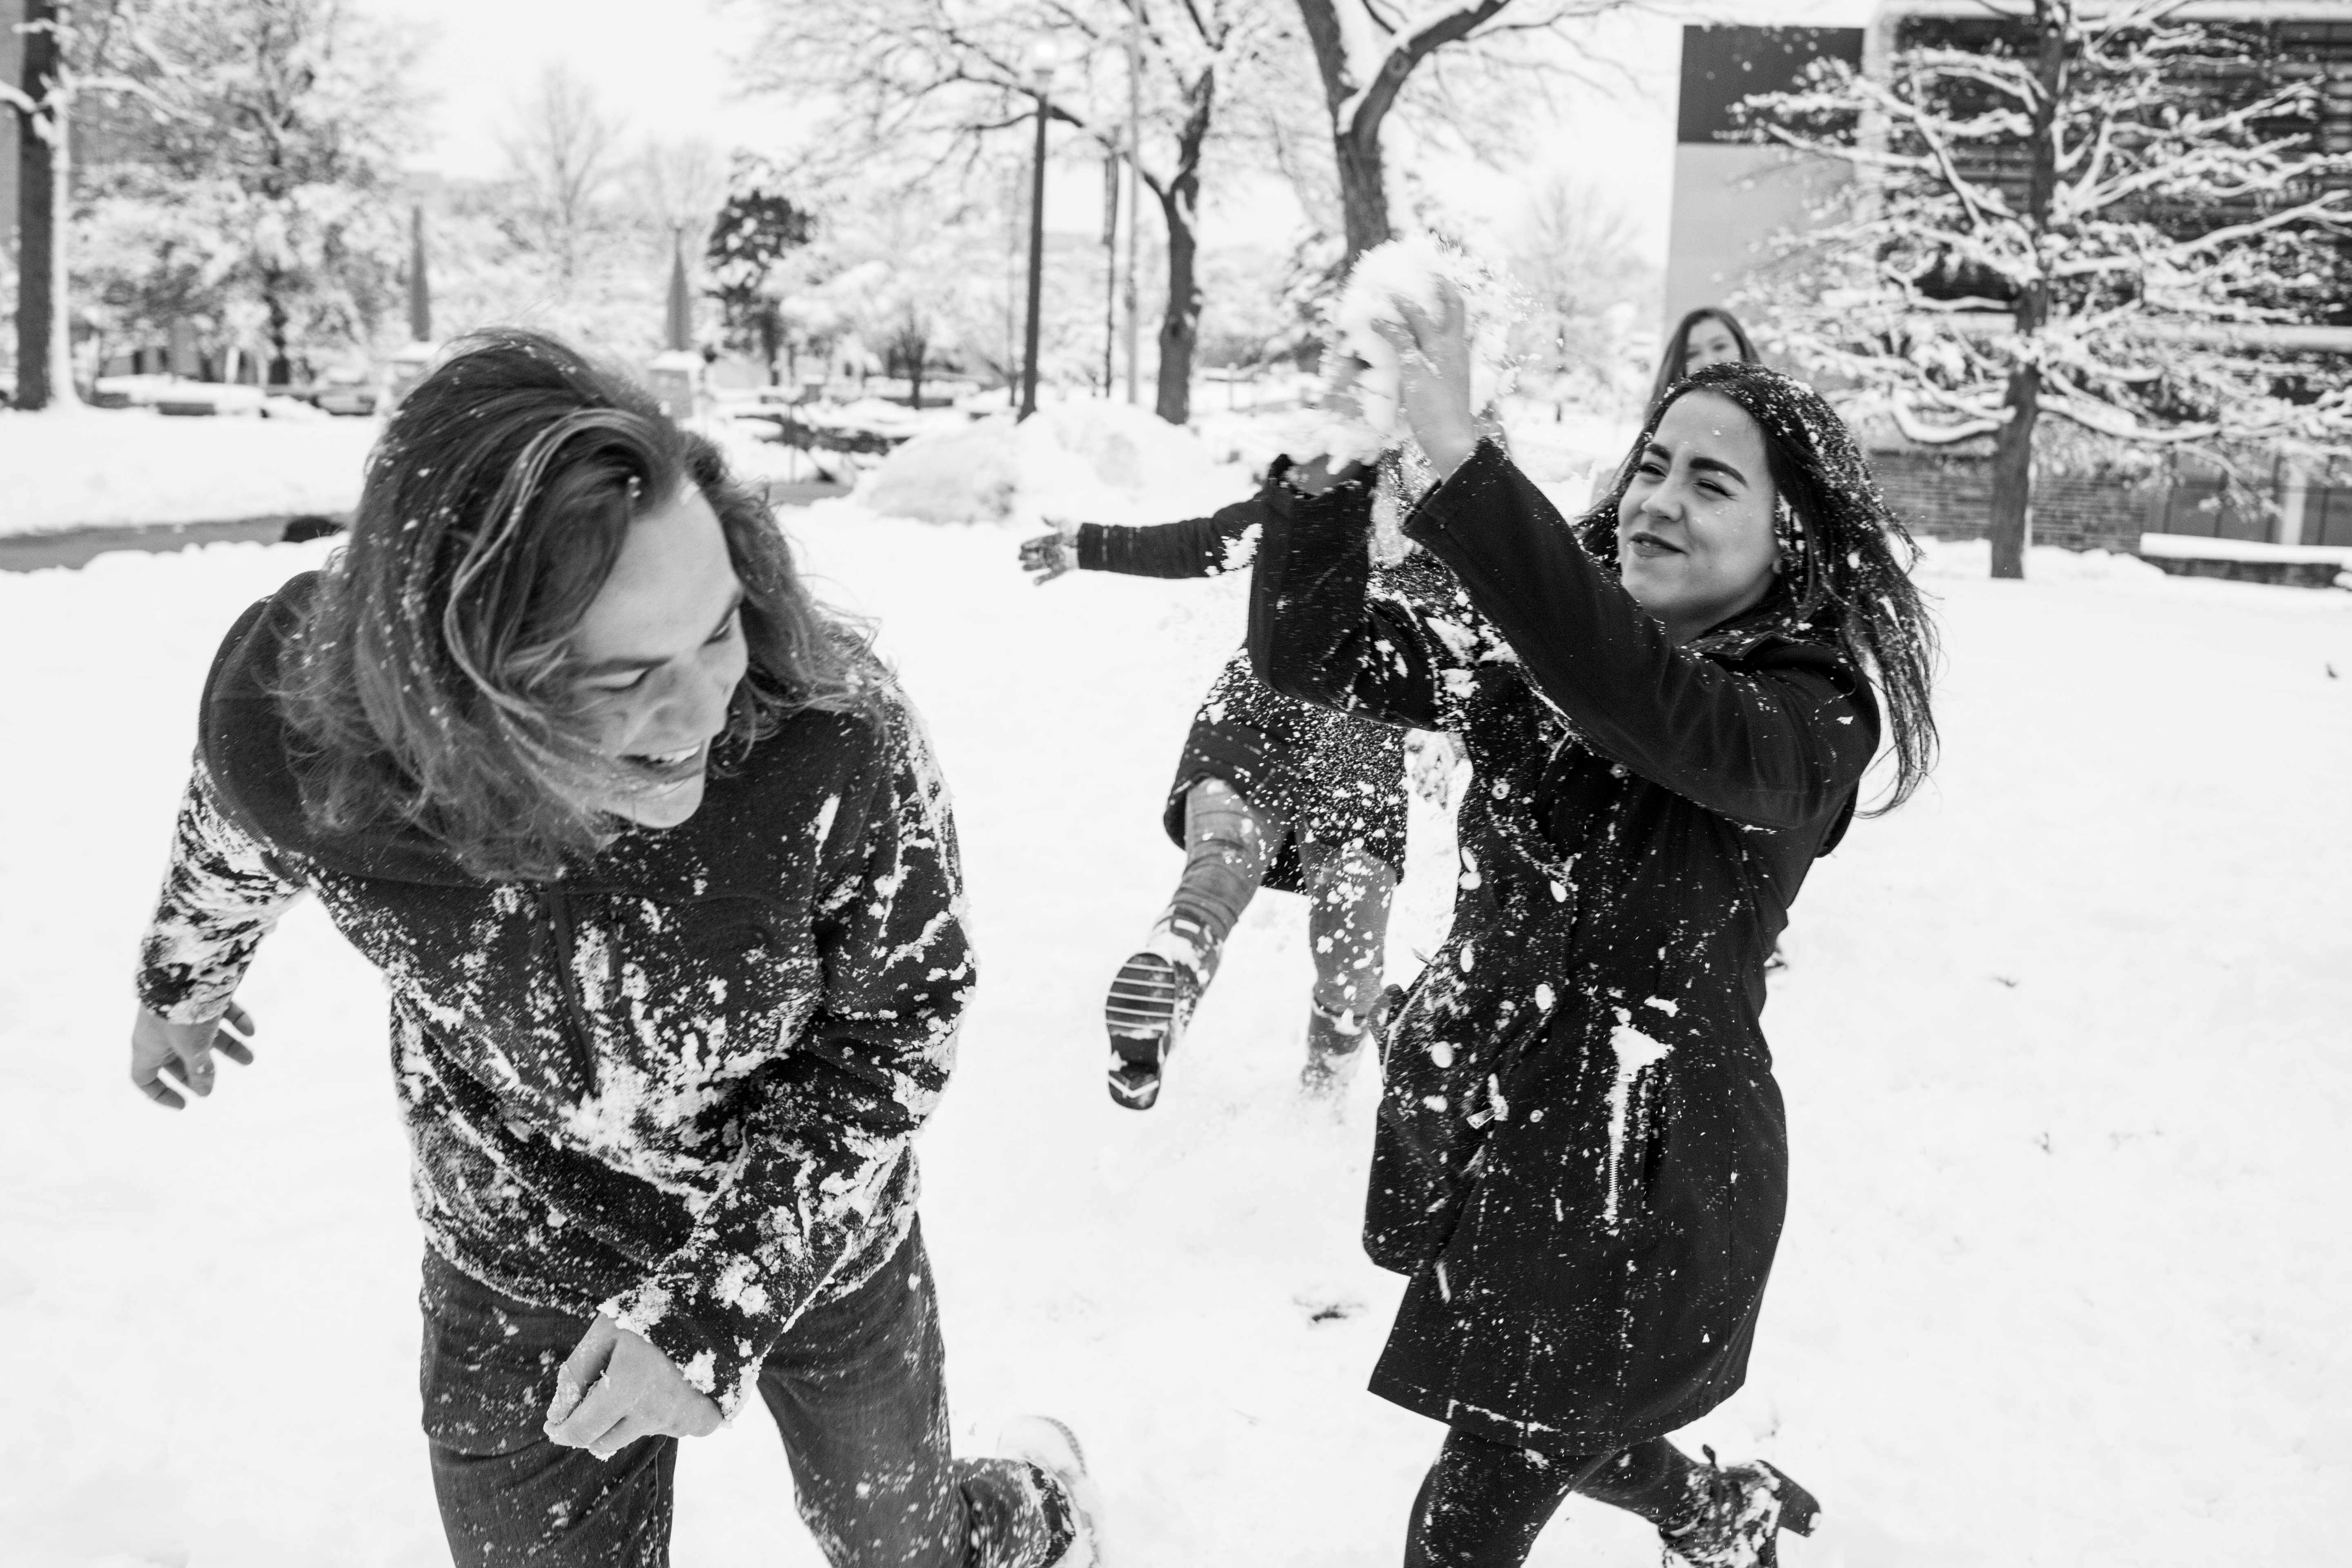 A black and white photograph of UMKC students in a snowball fight.